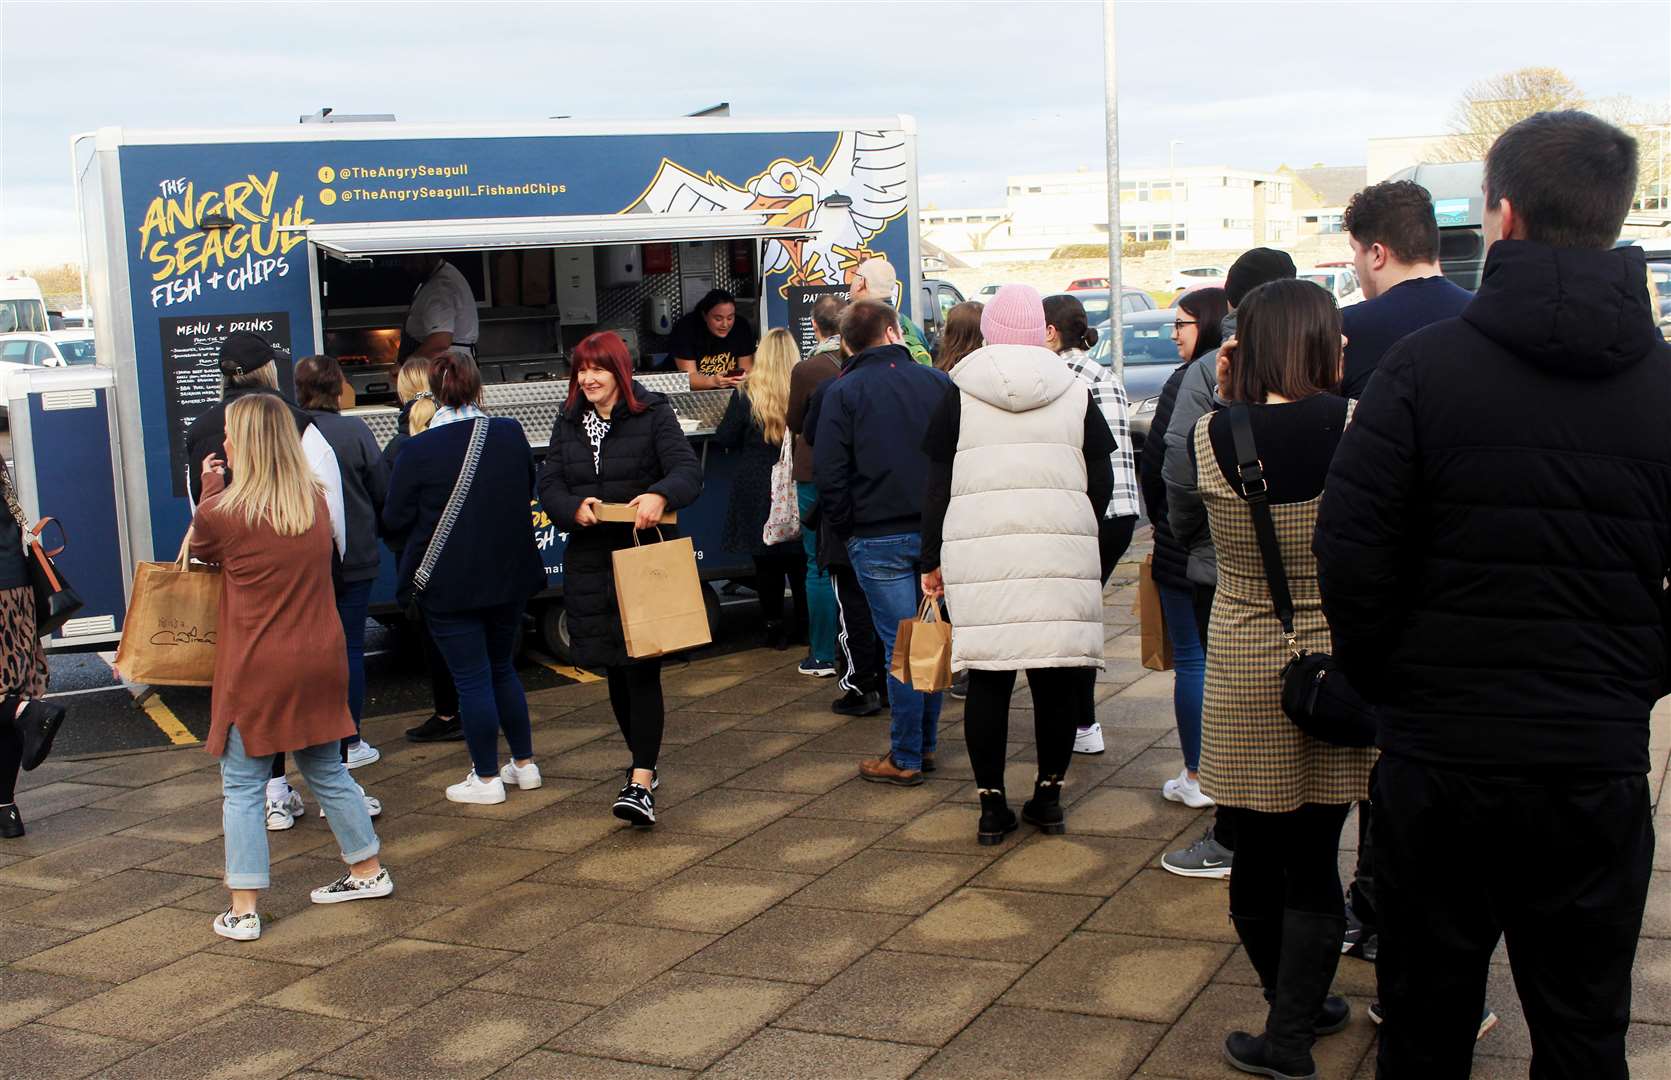 A queue at the Angry Seagull food truck. Picture: Alan Hendry